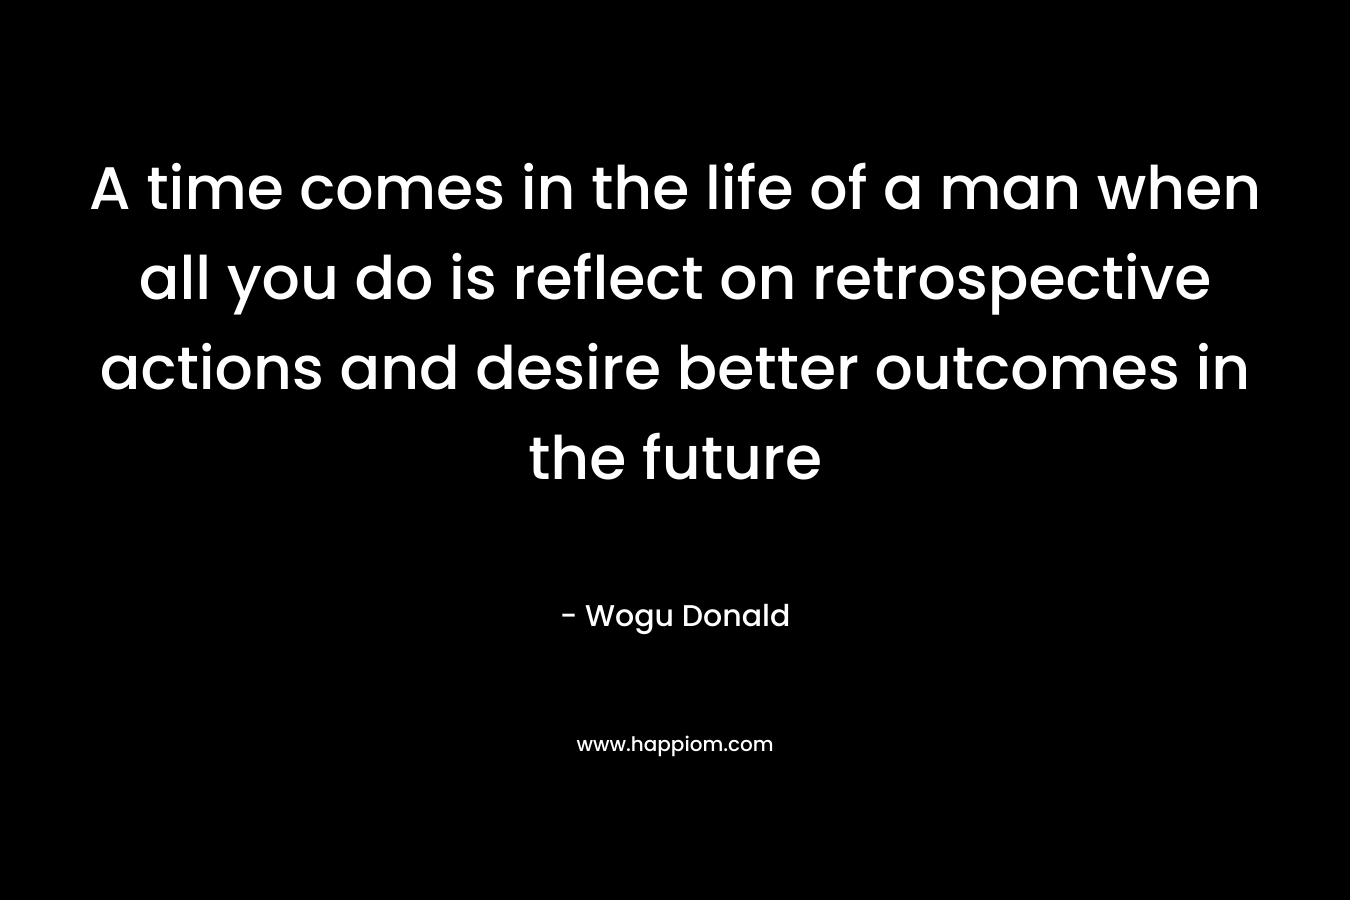 A time comes in the life of a man when all you do is reflect on retrospective actions and desire better outcomes in the future – Wogu Donald